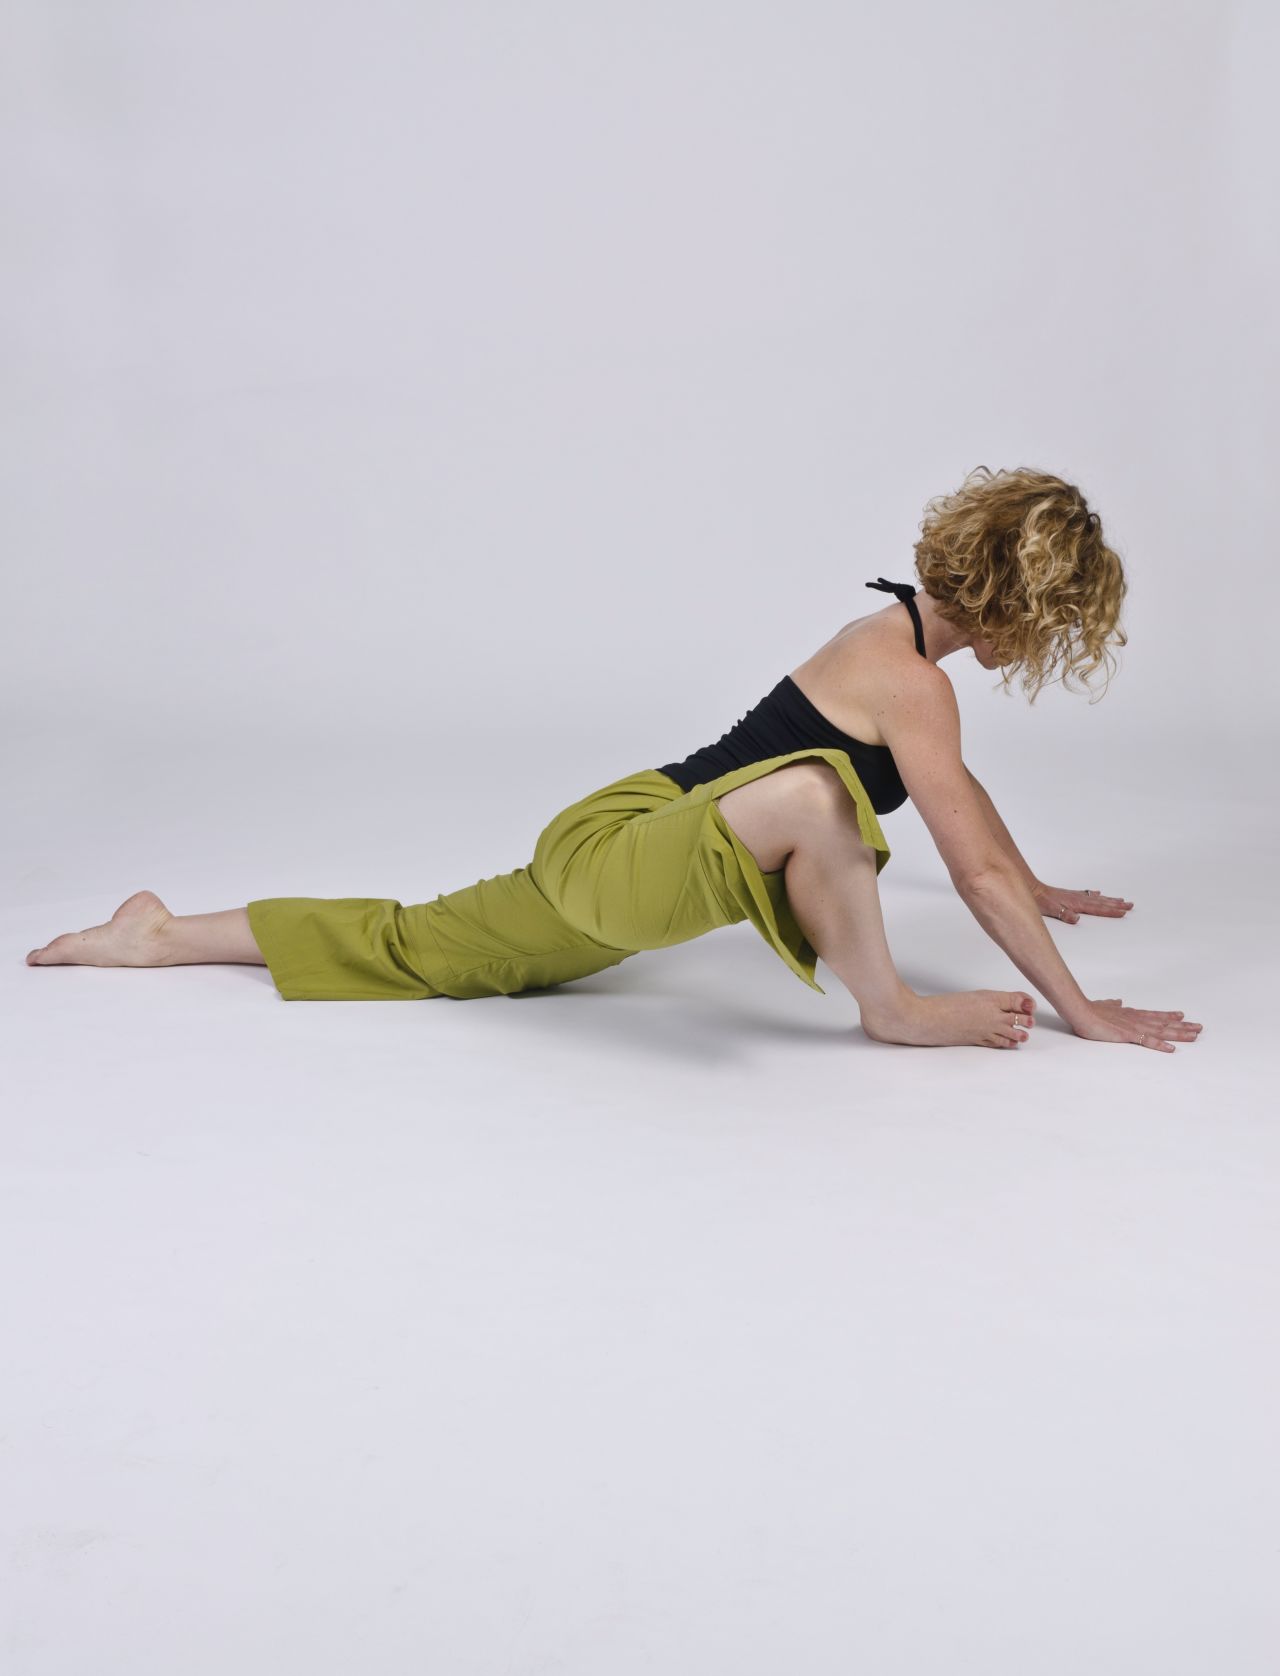 This is a piriformis-stretching pose for the front leg and a hip-flexor stretch for the back leg.